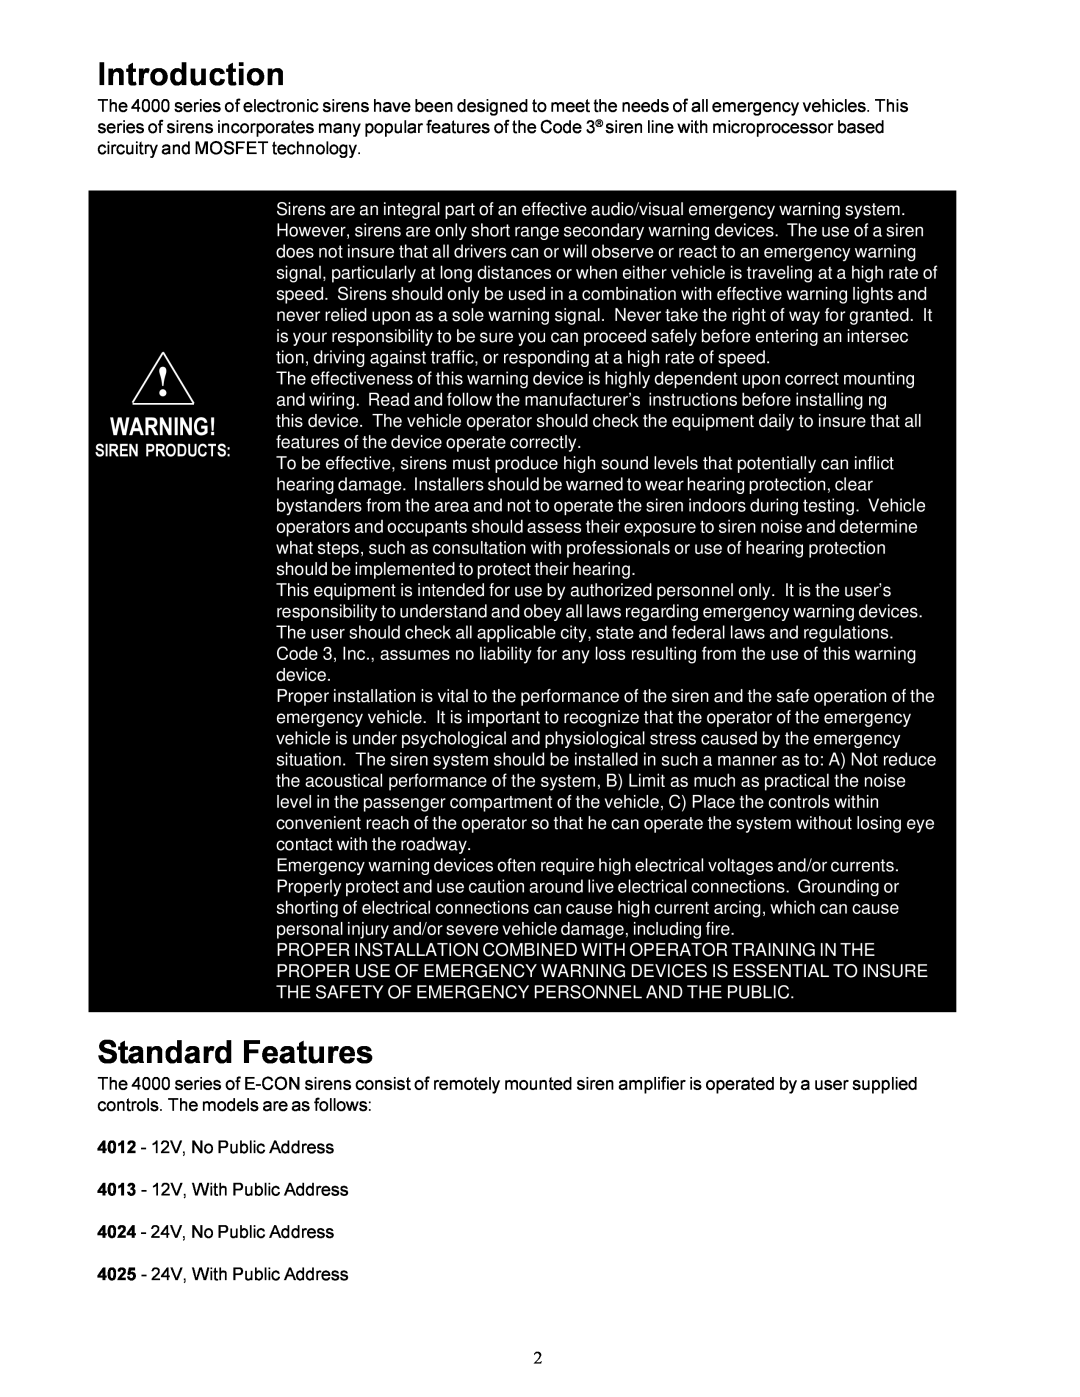 Bosch Appliances 4000 operation manual Introduction, Standard Features, Siren Products 